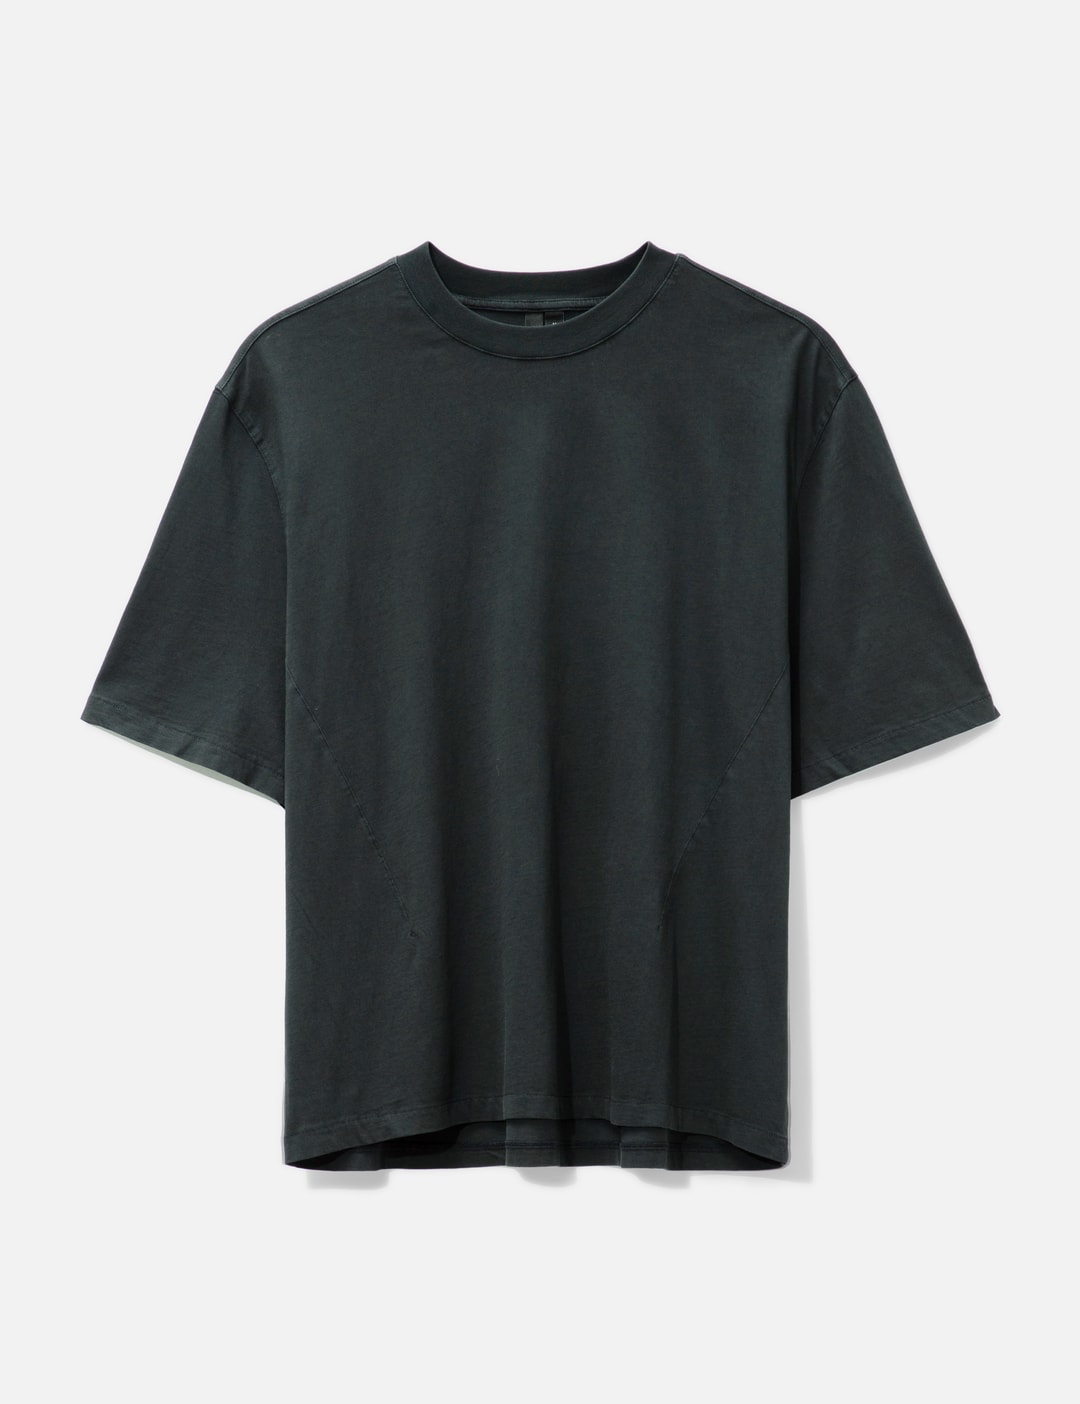 Entire Studios - Dart T-shirt | HBX - Globally Curated Fashion and ...